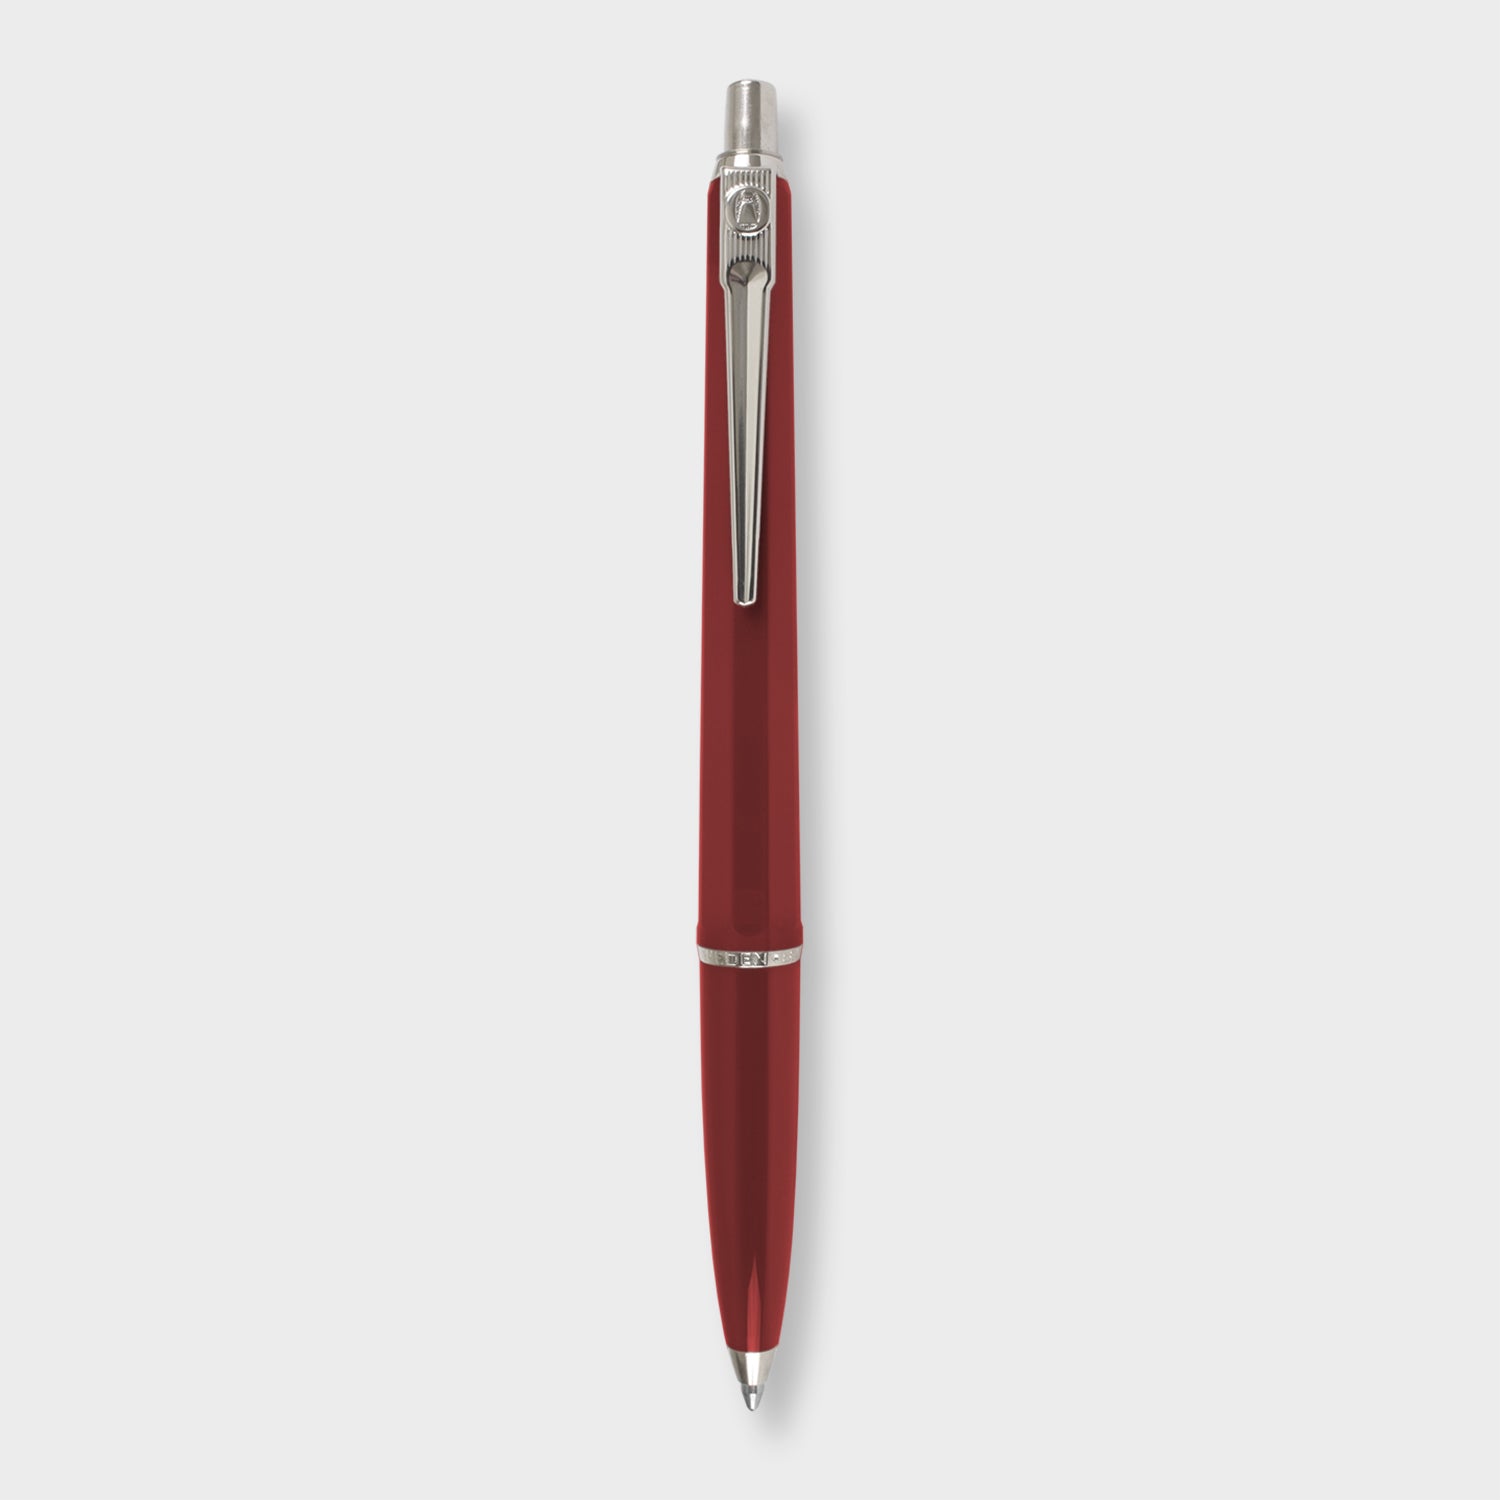 A rich burgundy colored ballpoint refillable archival pen